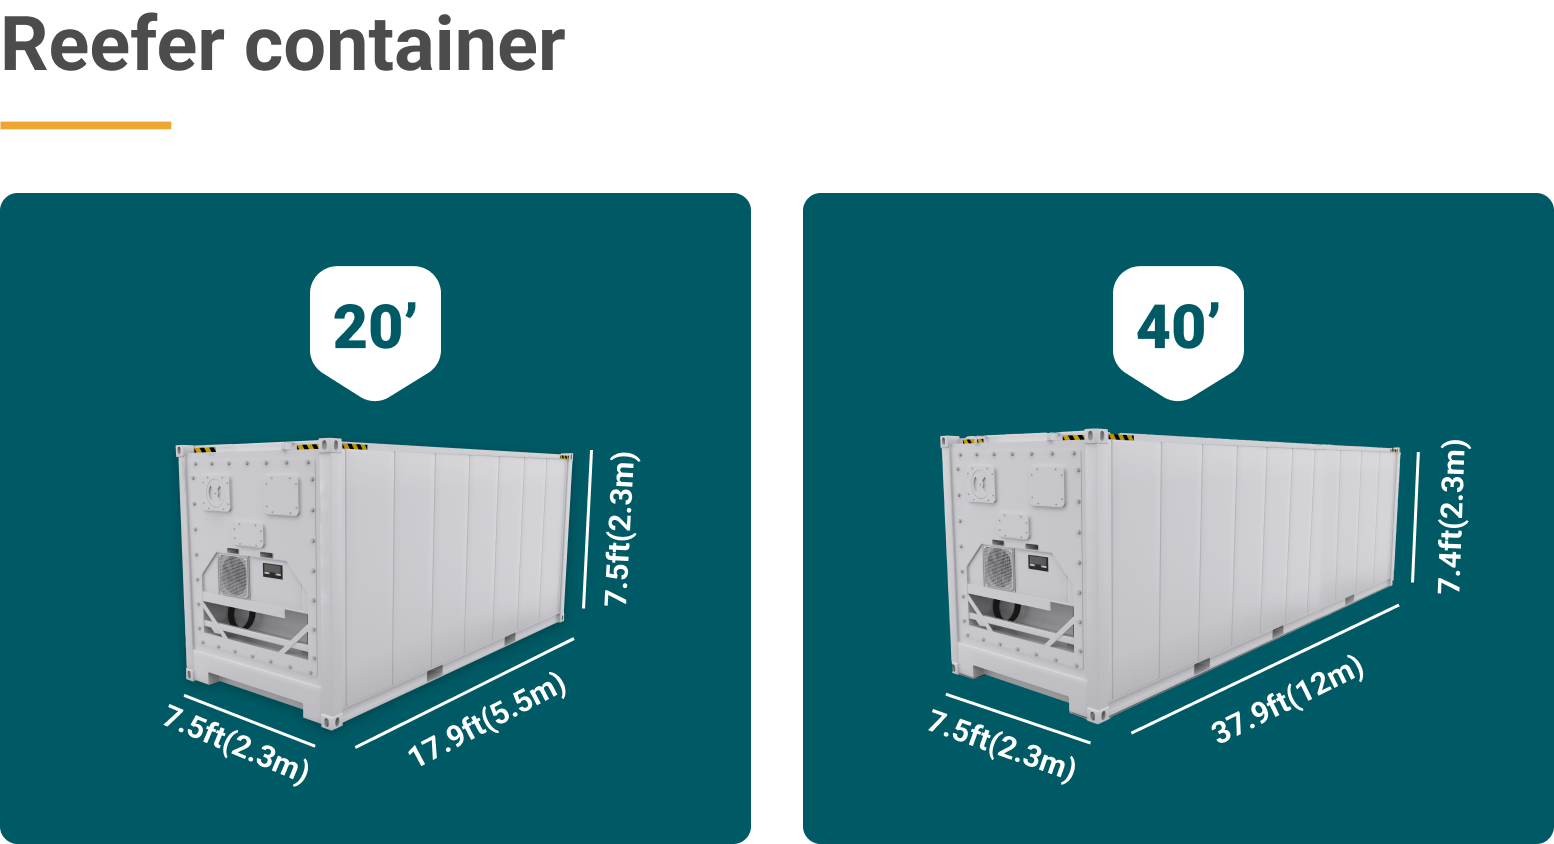 reefer container specifications